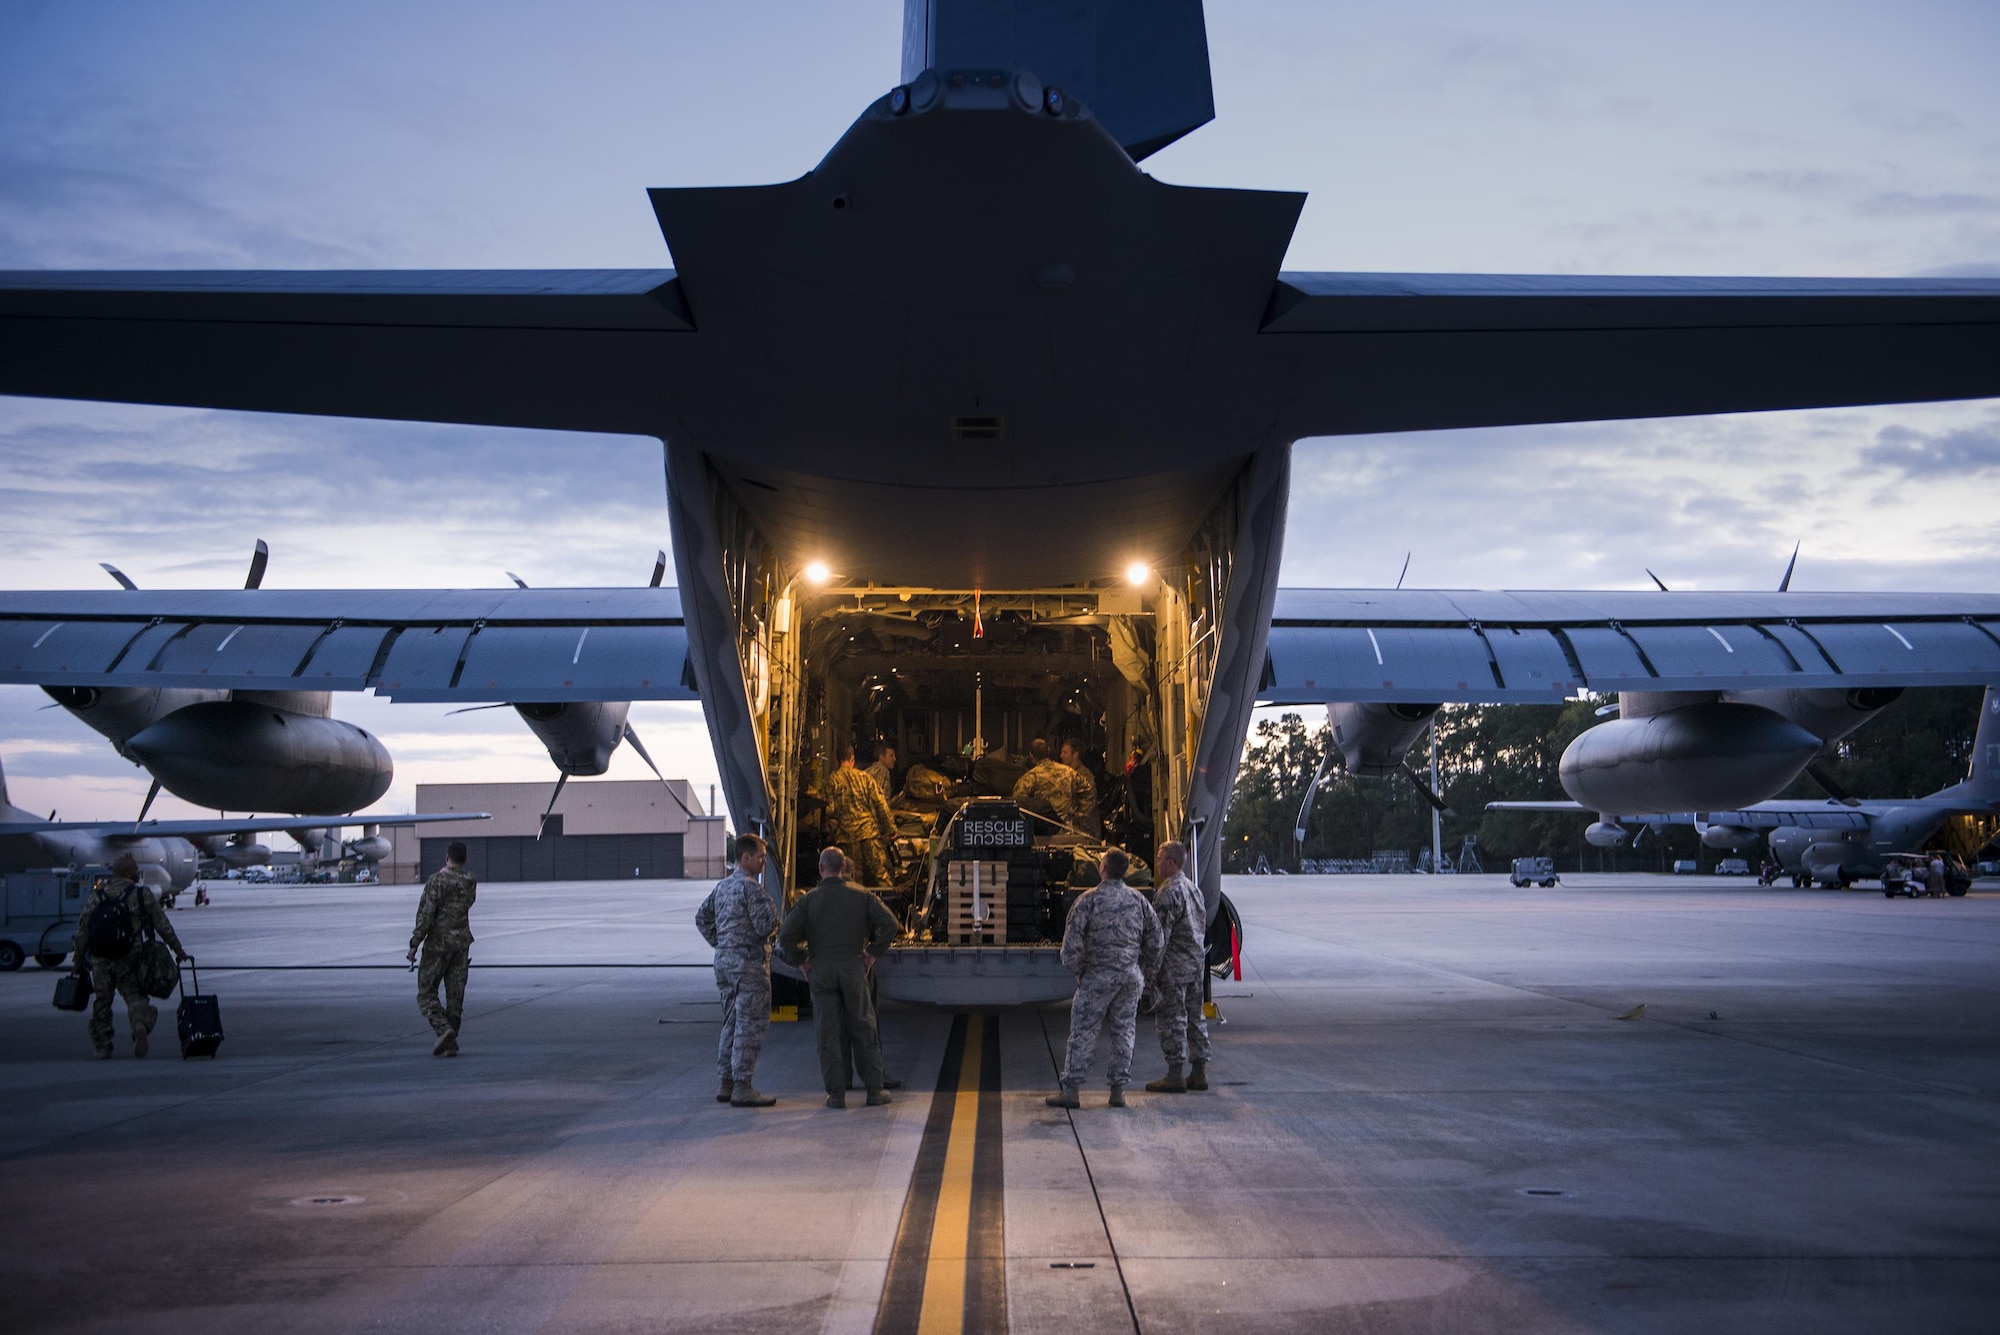 Airmen from the 71st Rescue Squadron secure cargo in the back of an HC-130J Combat King II, Nov. 27, 2015, at Moody Air Force Base, Ga. The HC-130J enhances the 71 RQS ability to provide global personnel recovery for the United States and our coalition partners. (U.S. Air Force photo by Senior Airman Ryan Callaghan/Released)